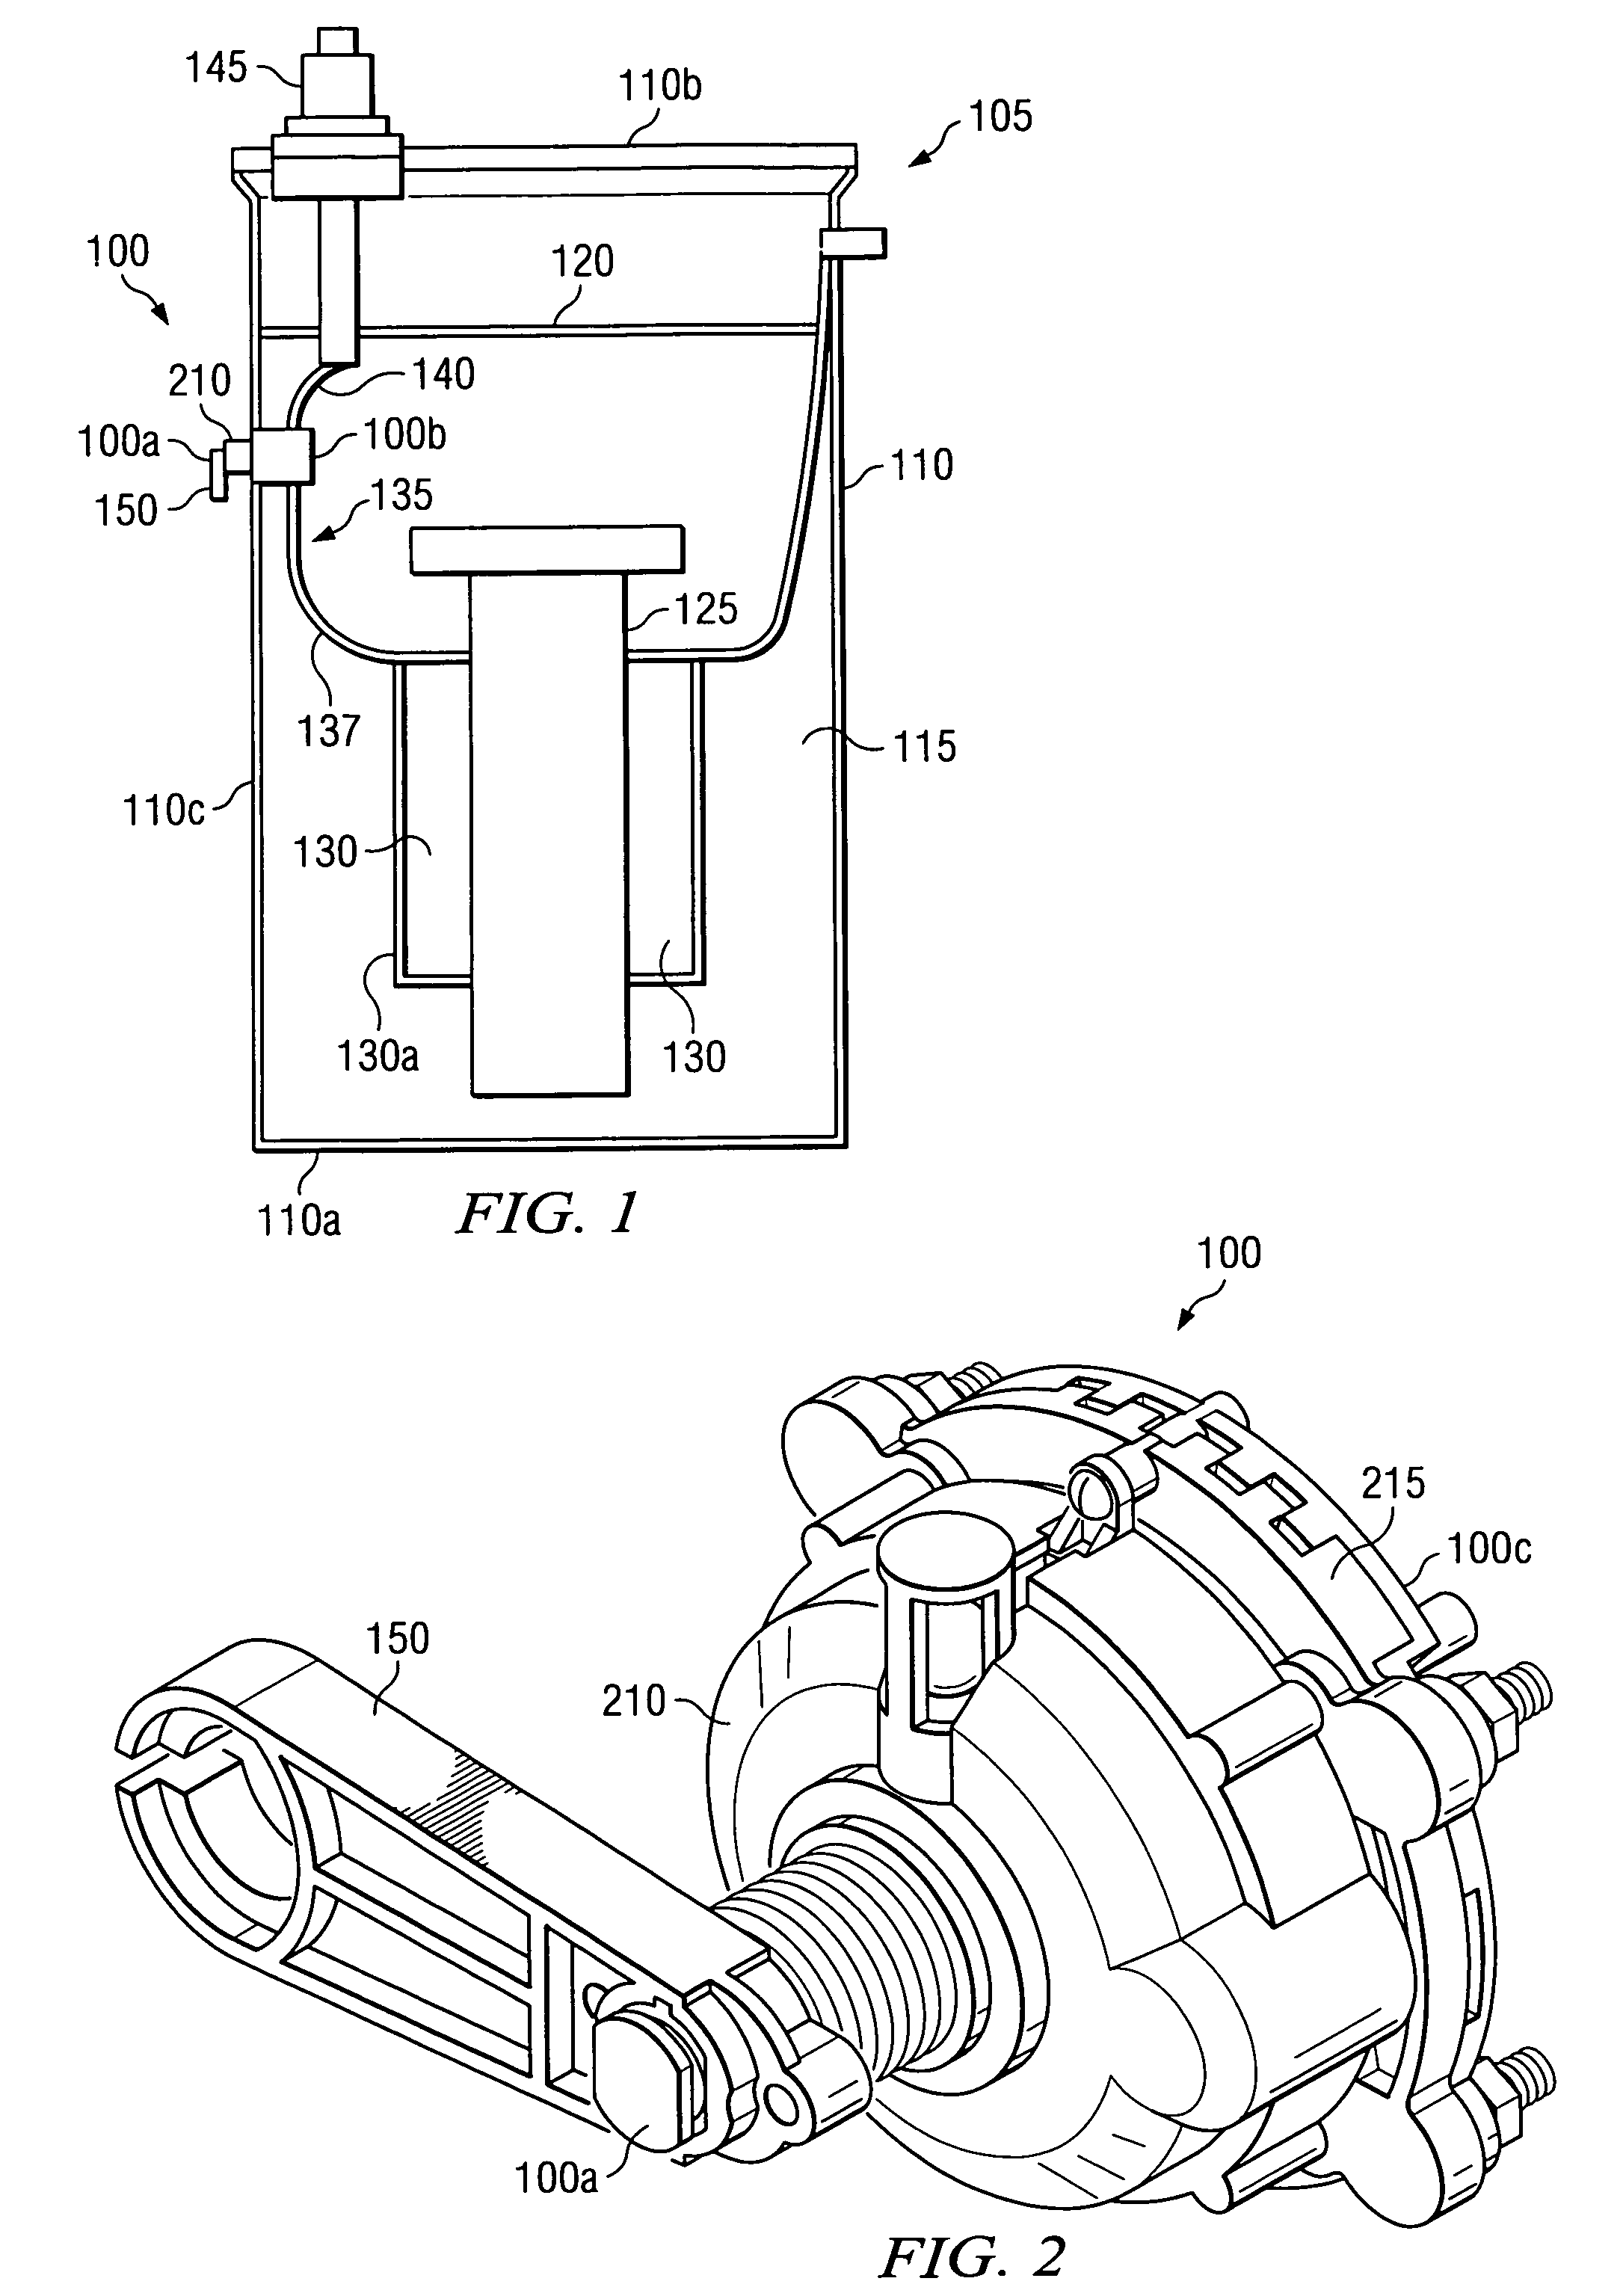 Adjustable rating for a fault interrupter and load break switch